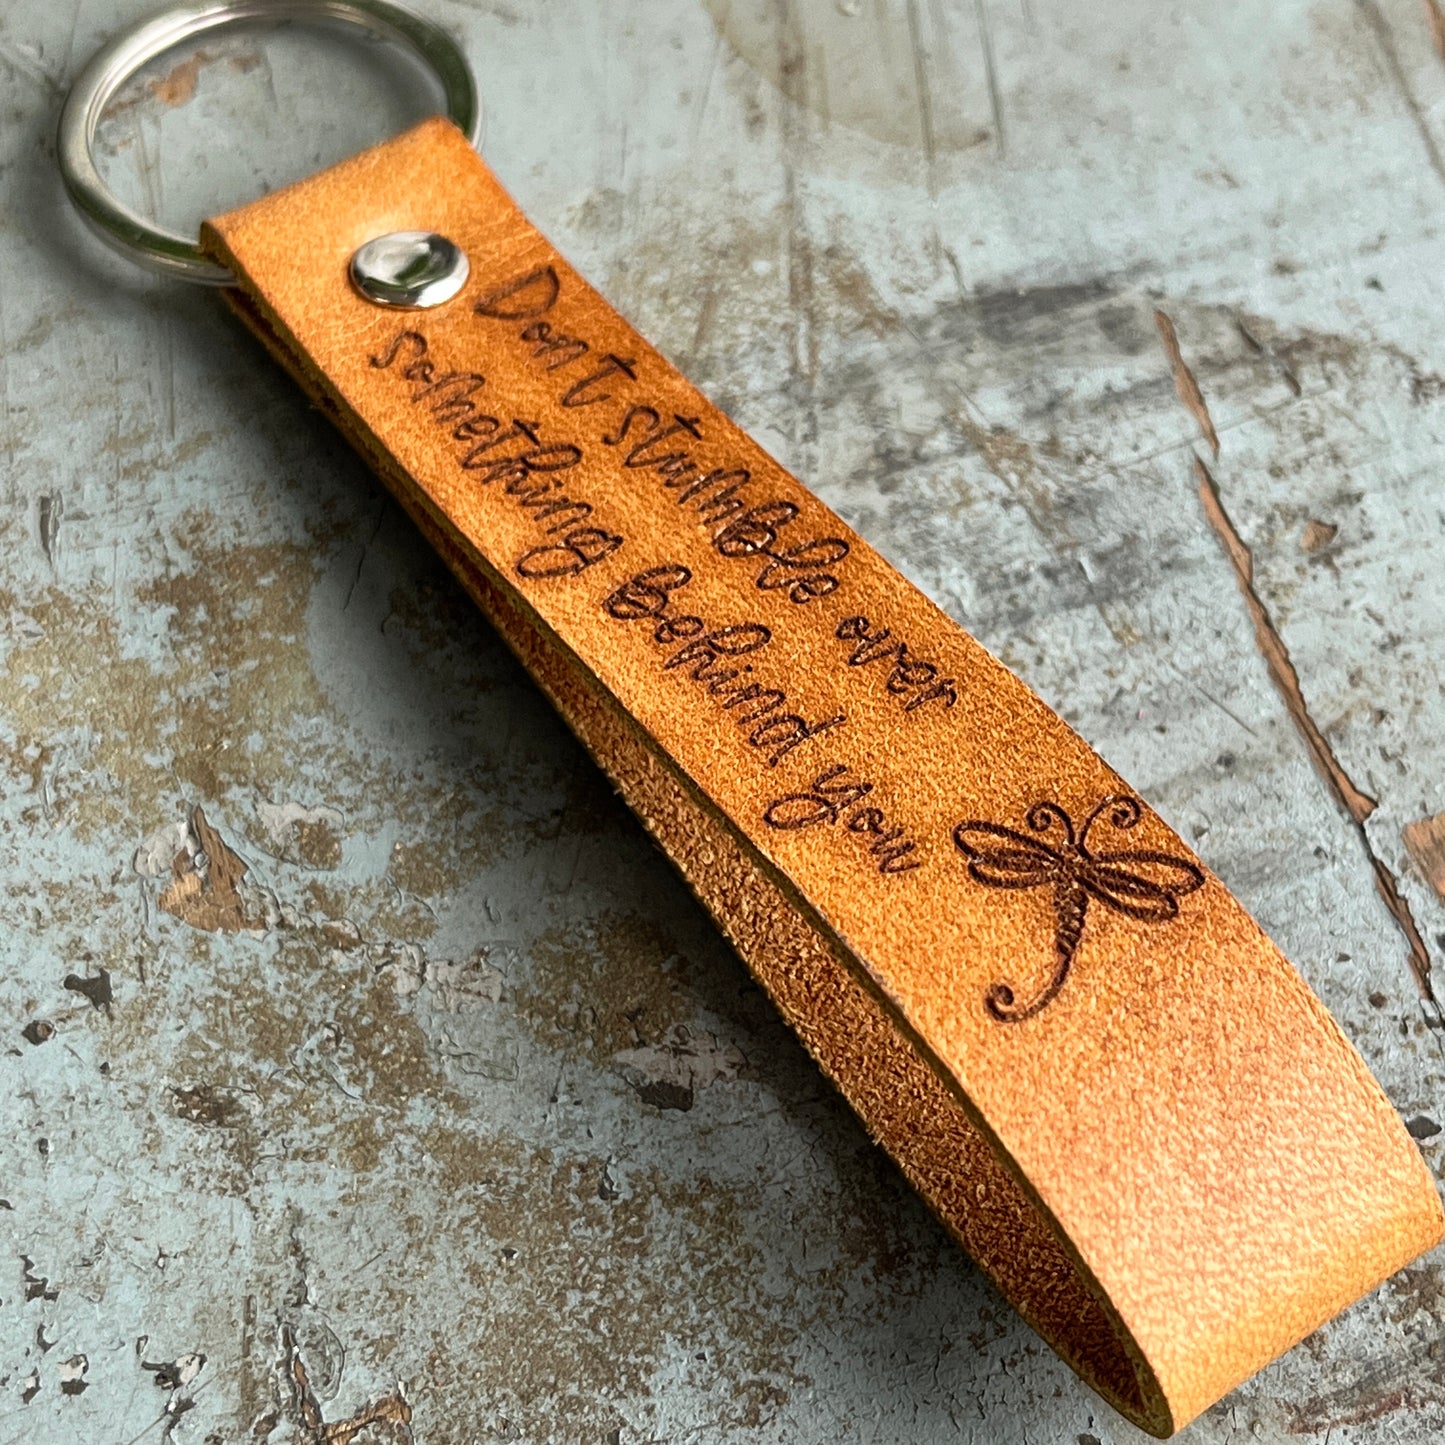 Thinking of You Gift, Encouragement Gift for Women, Dragonfly Leather Wristlet Keychain